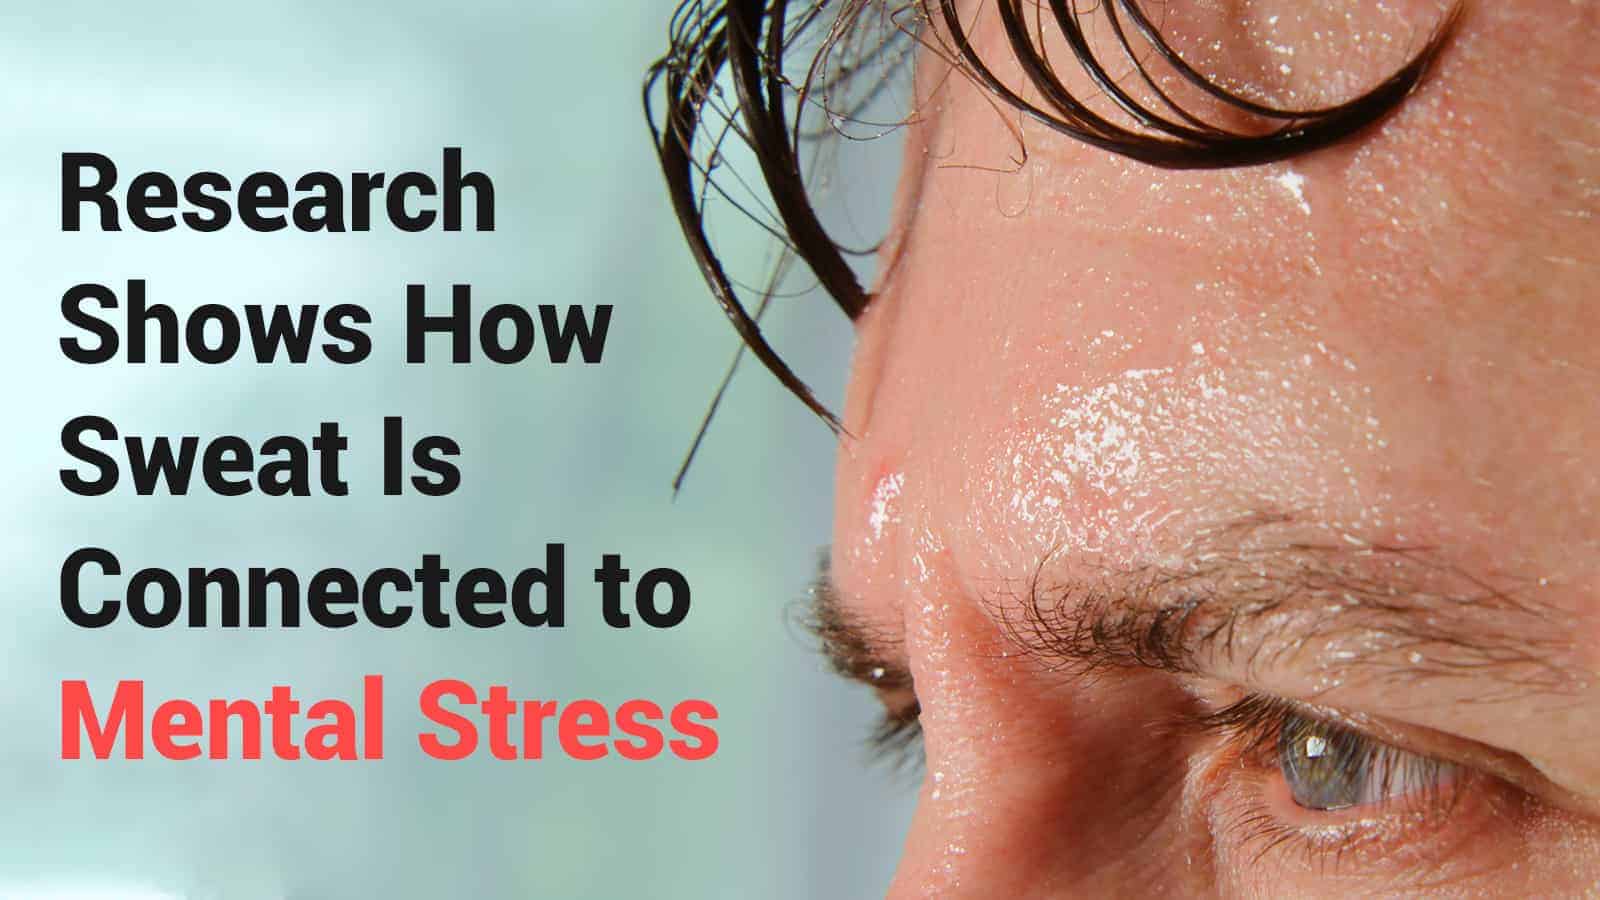 Research Shows How Sweat Is Connected to Mental Stress